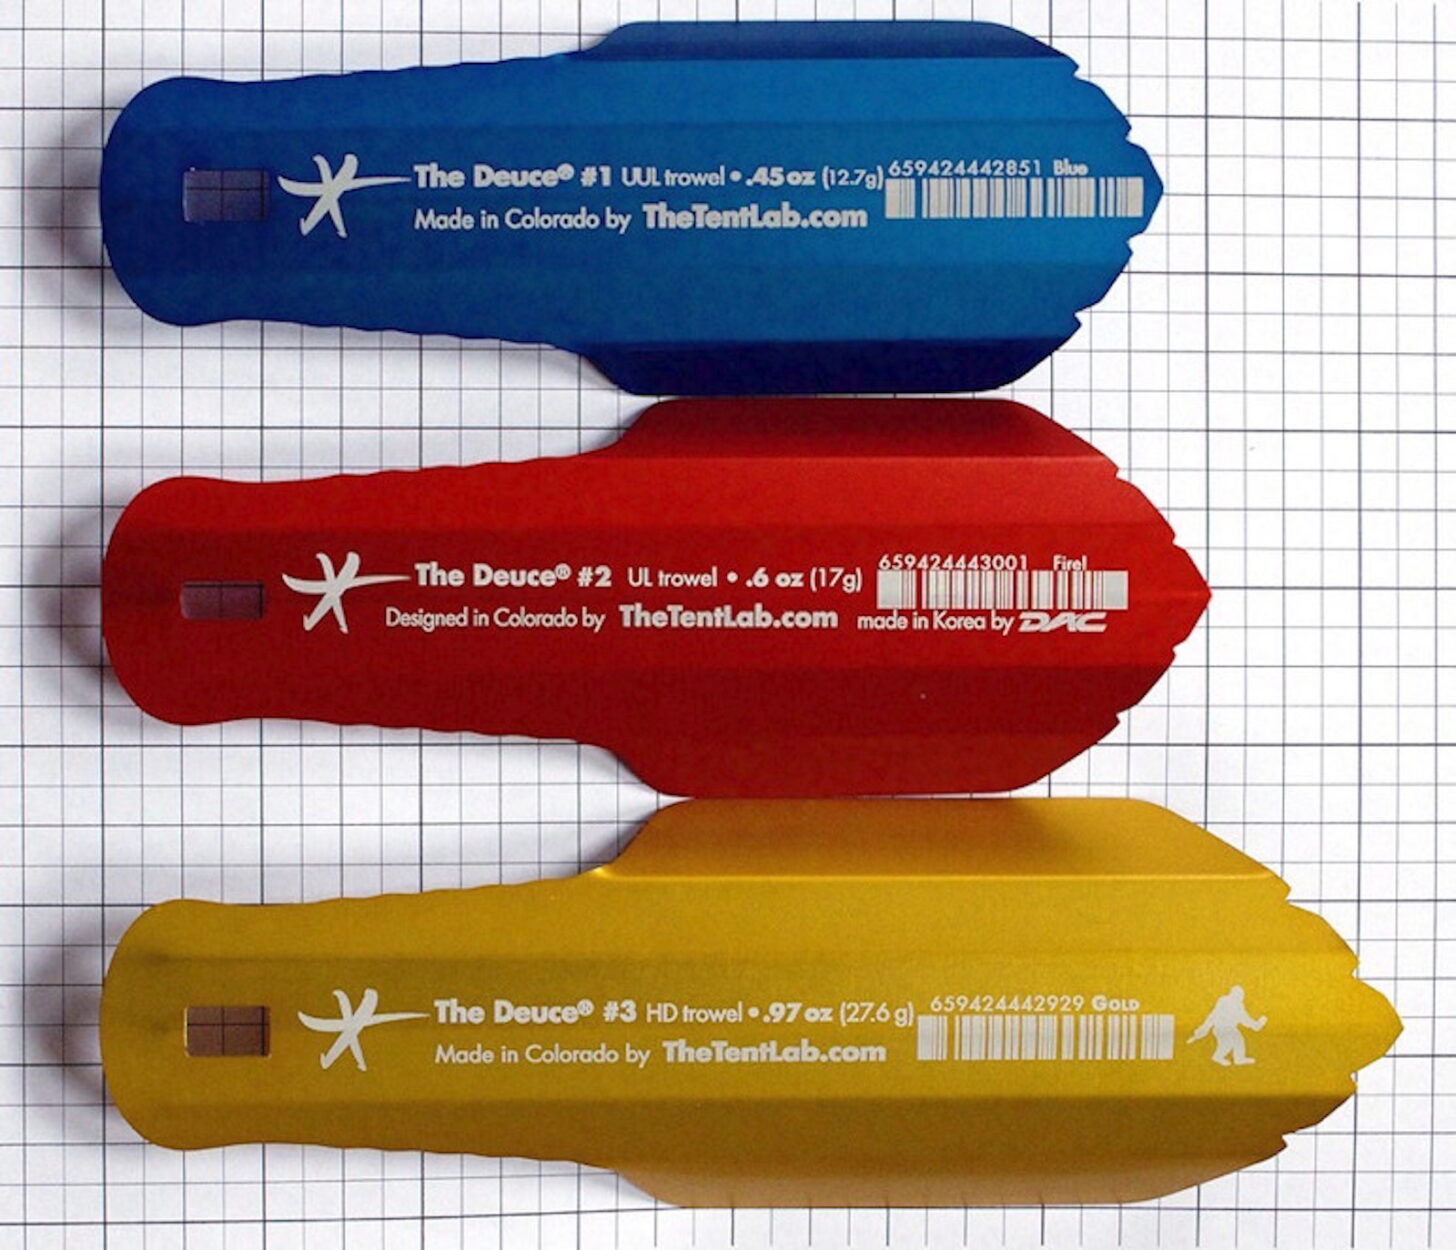 Three metal trowels of different sizes and colors (blue, red, gold) lined up on graph paper.